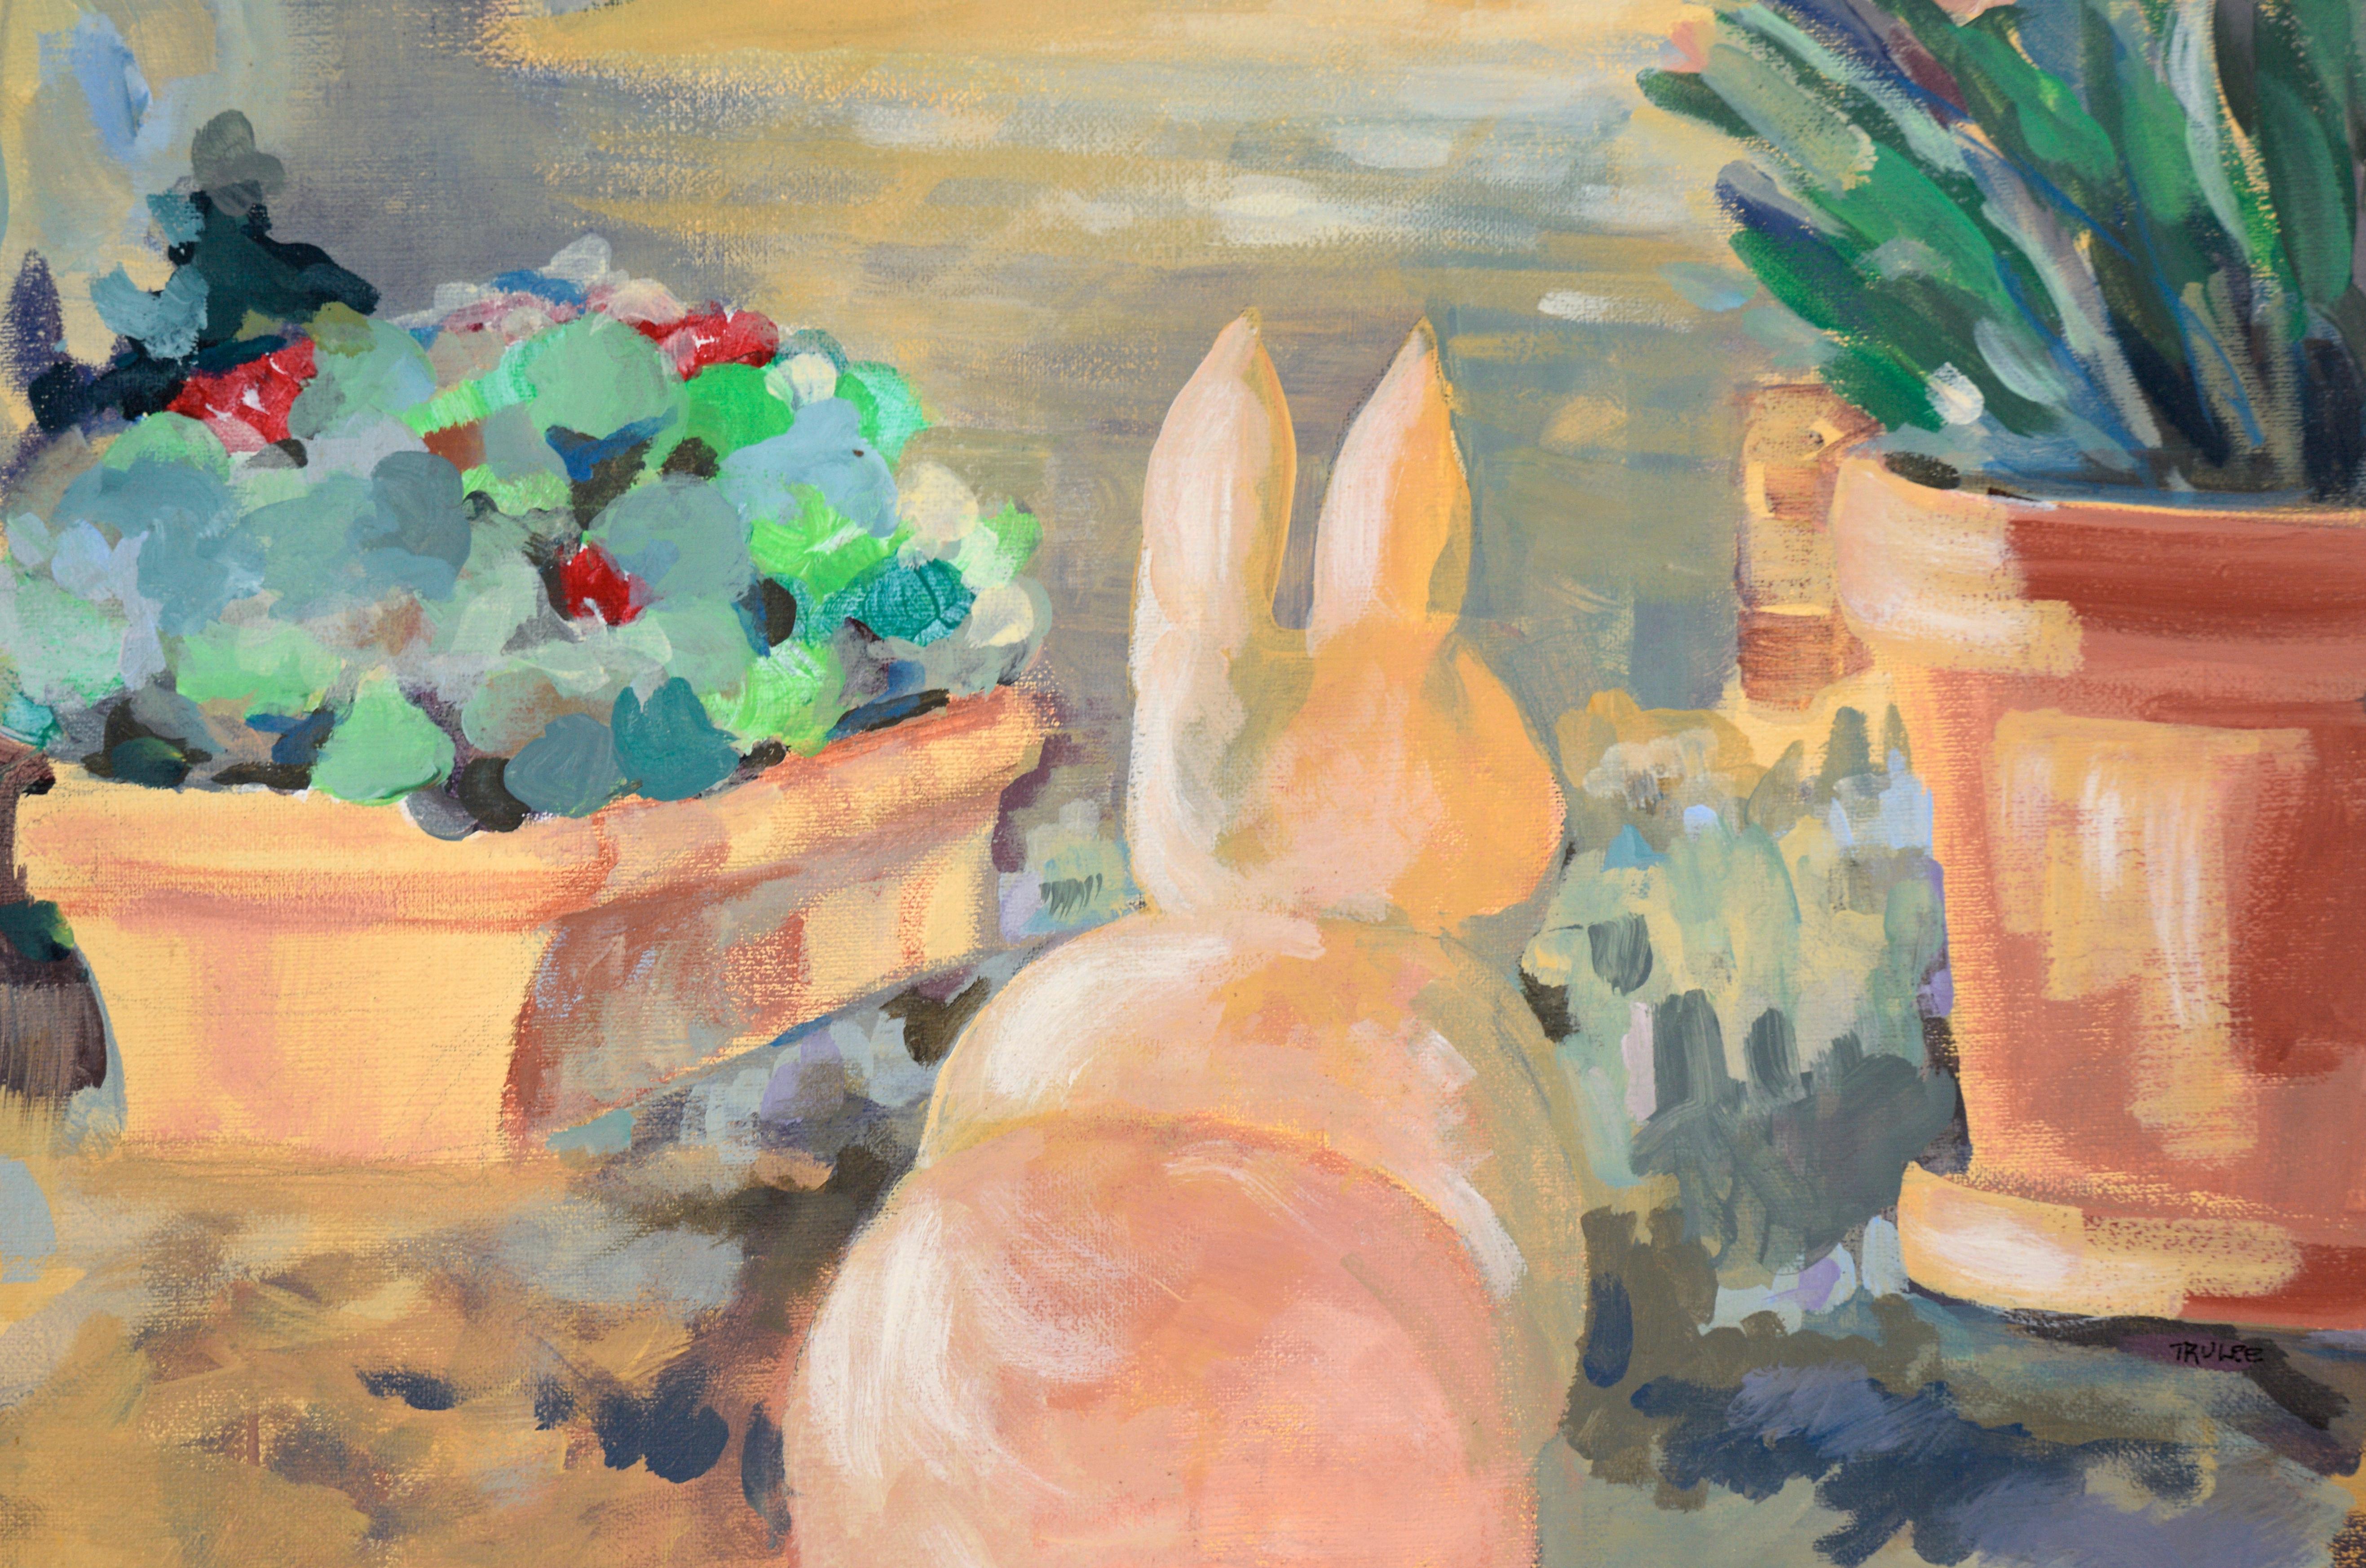 Rabbit Sculpture in the Garden - Acrylic on Canvas - American Impressionist Painting by Truelee